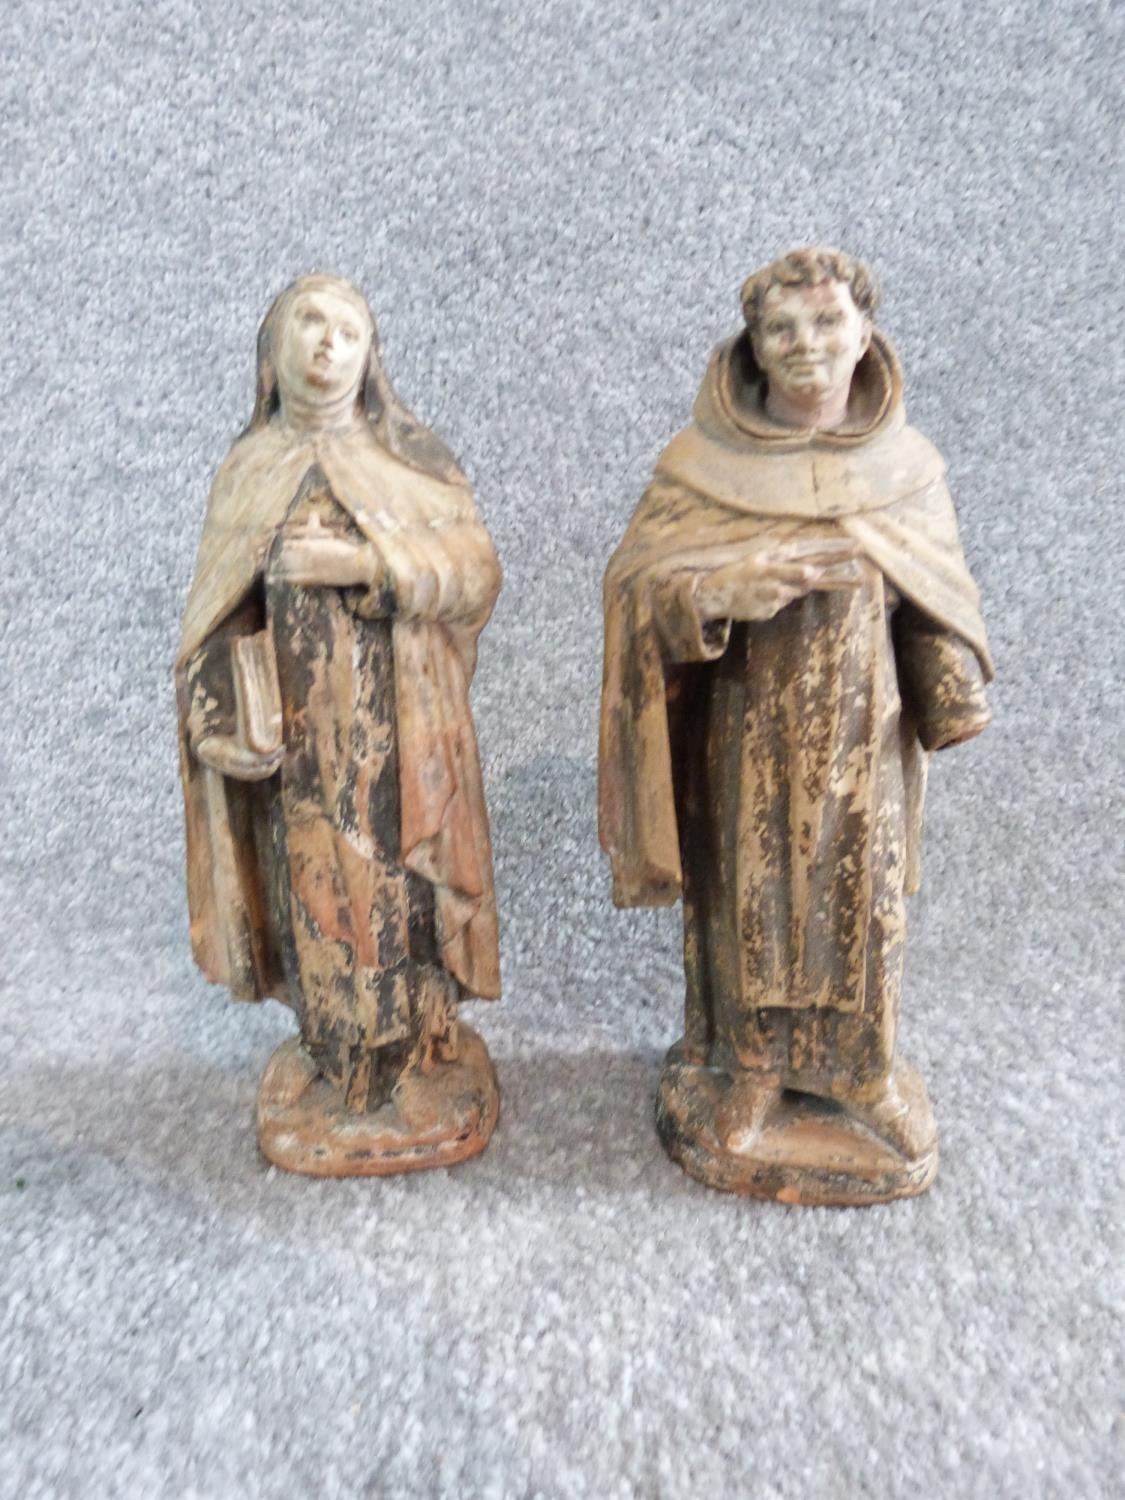 Two antique painted terracotta figures. One of a monk holding a candle and a bible and the other